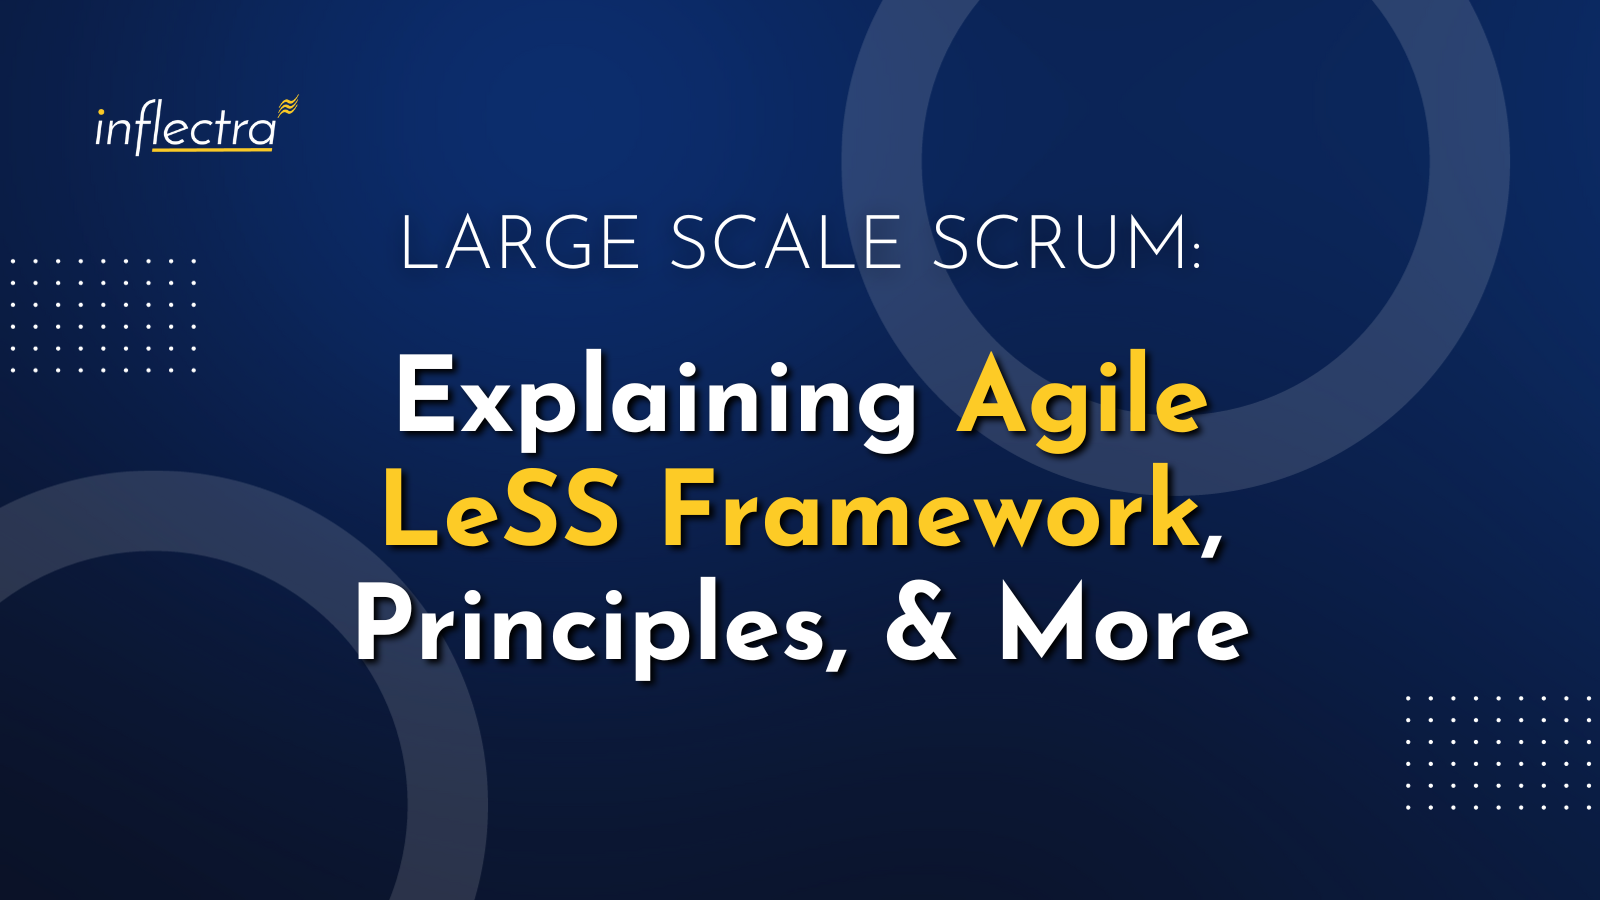 What Is Large Scale Scrum Agile Less Explained Inflectra